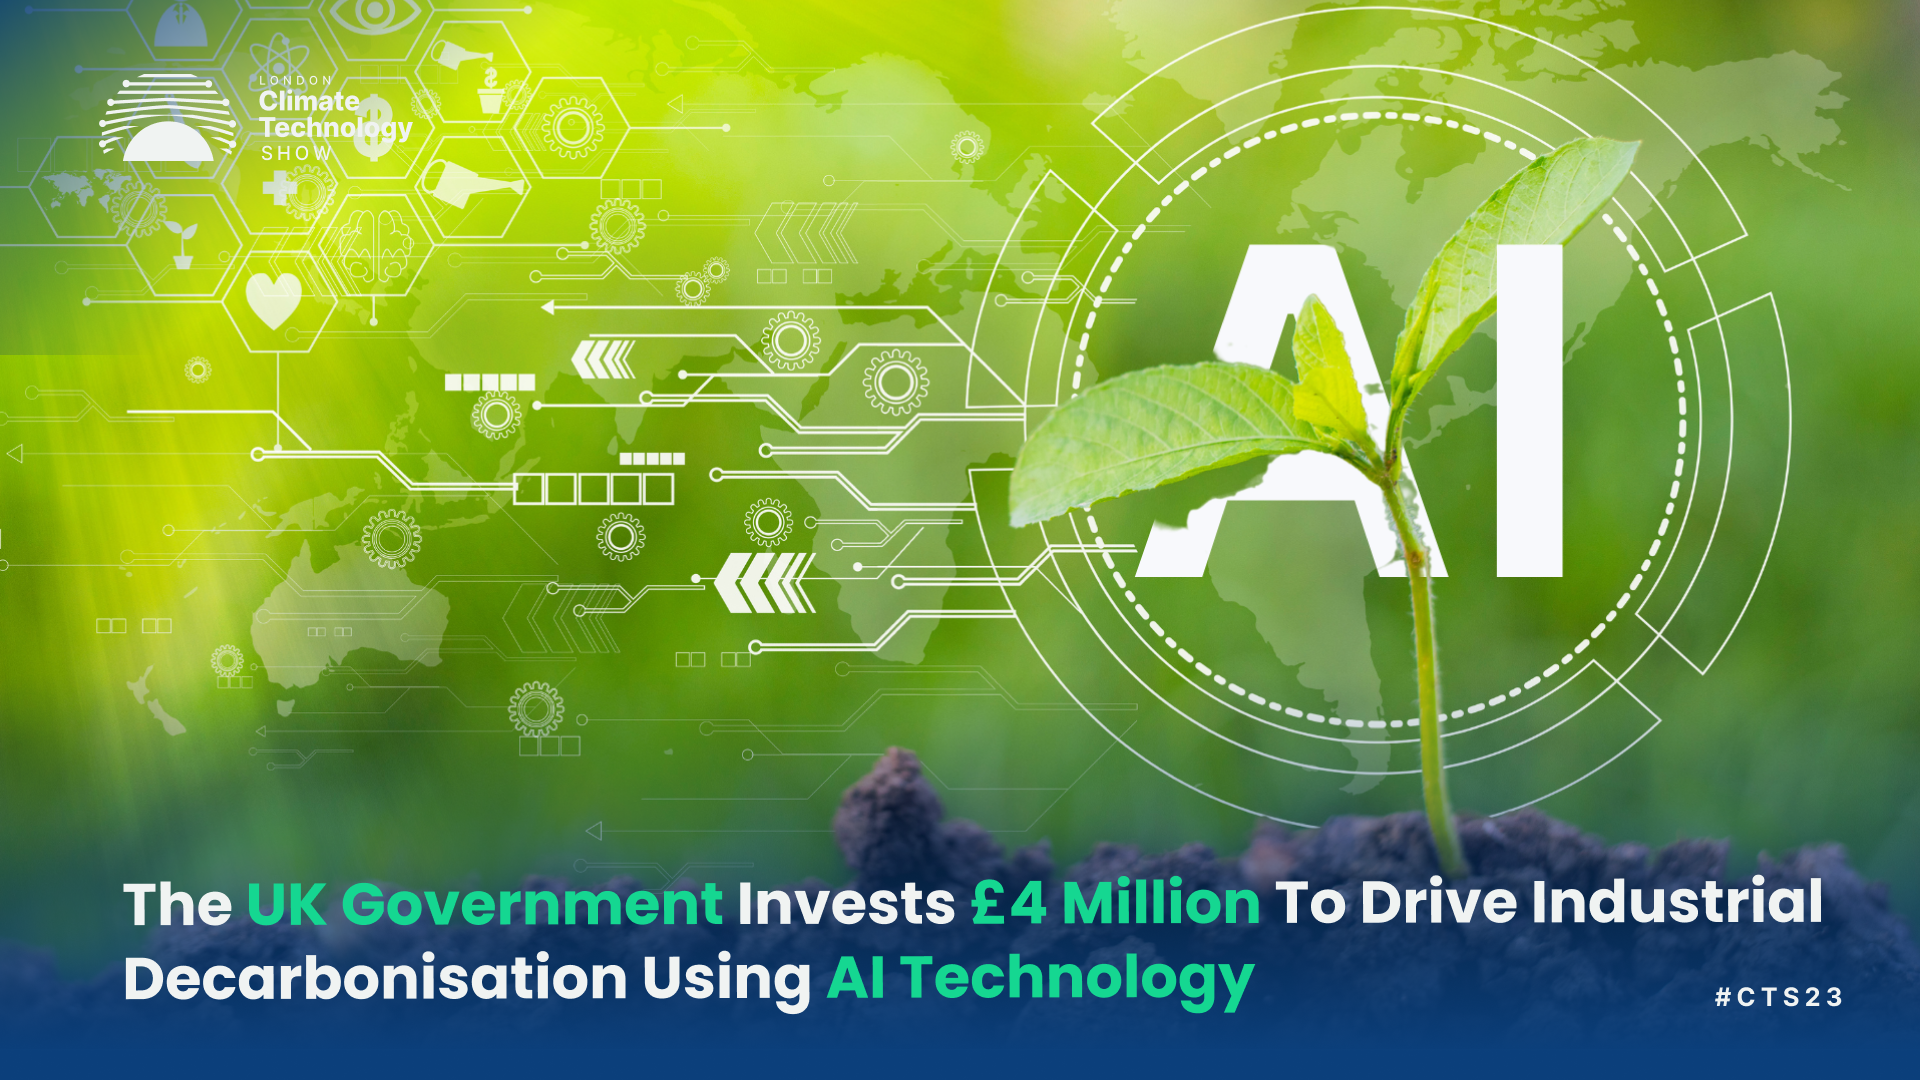 The UK Government Invests £4 Million To Drive Industrial Decarbonisation Using AI Technology